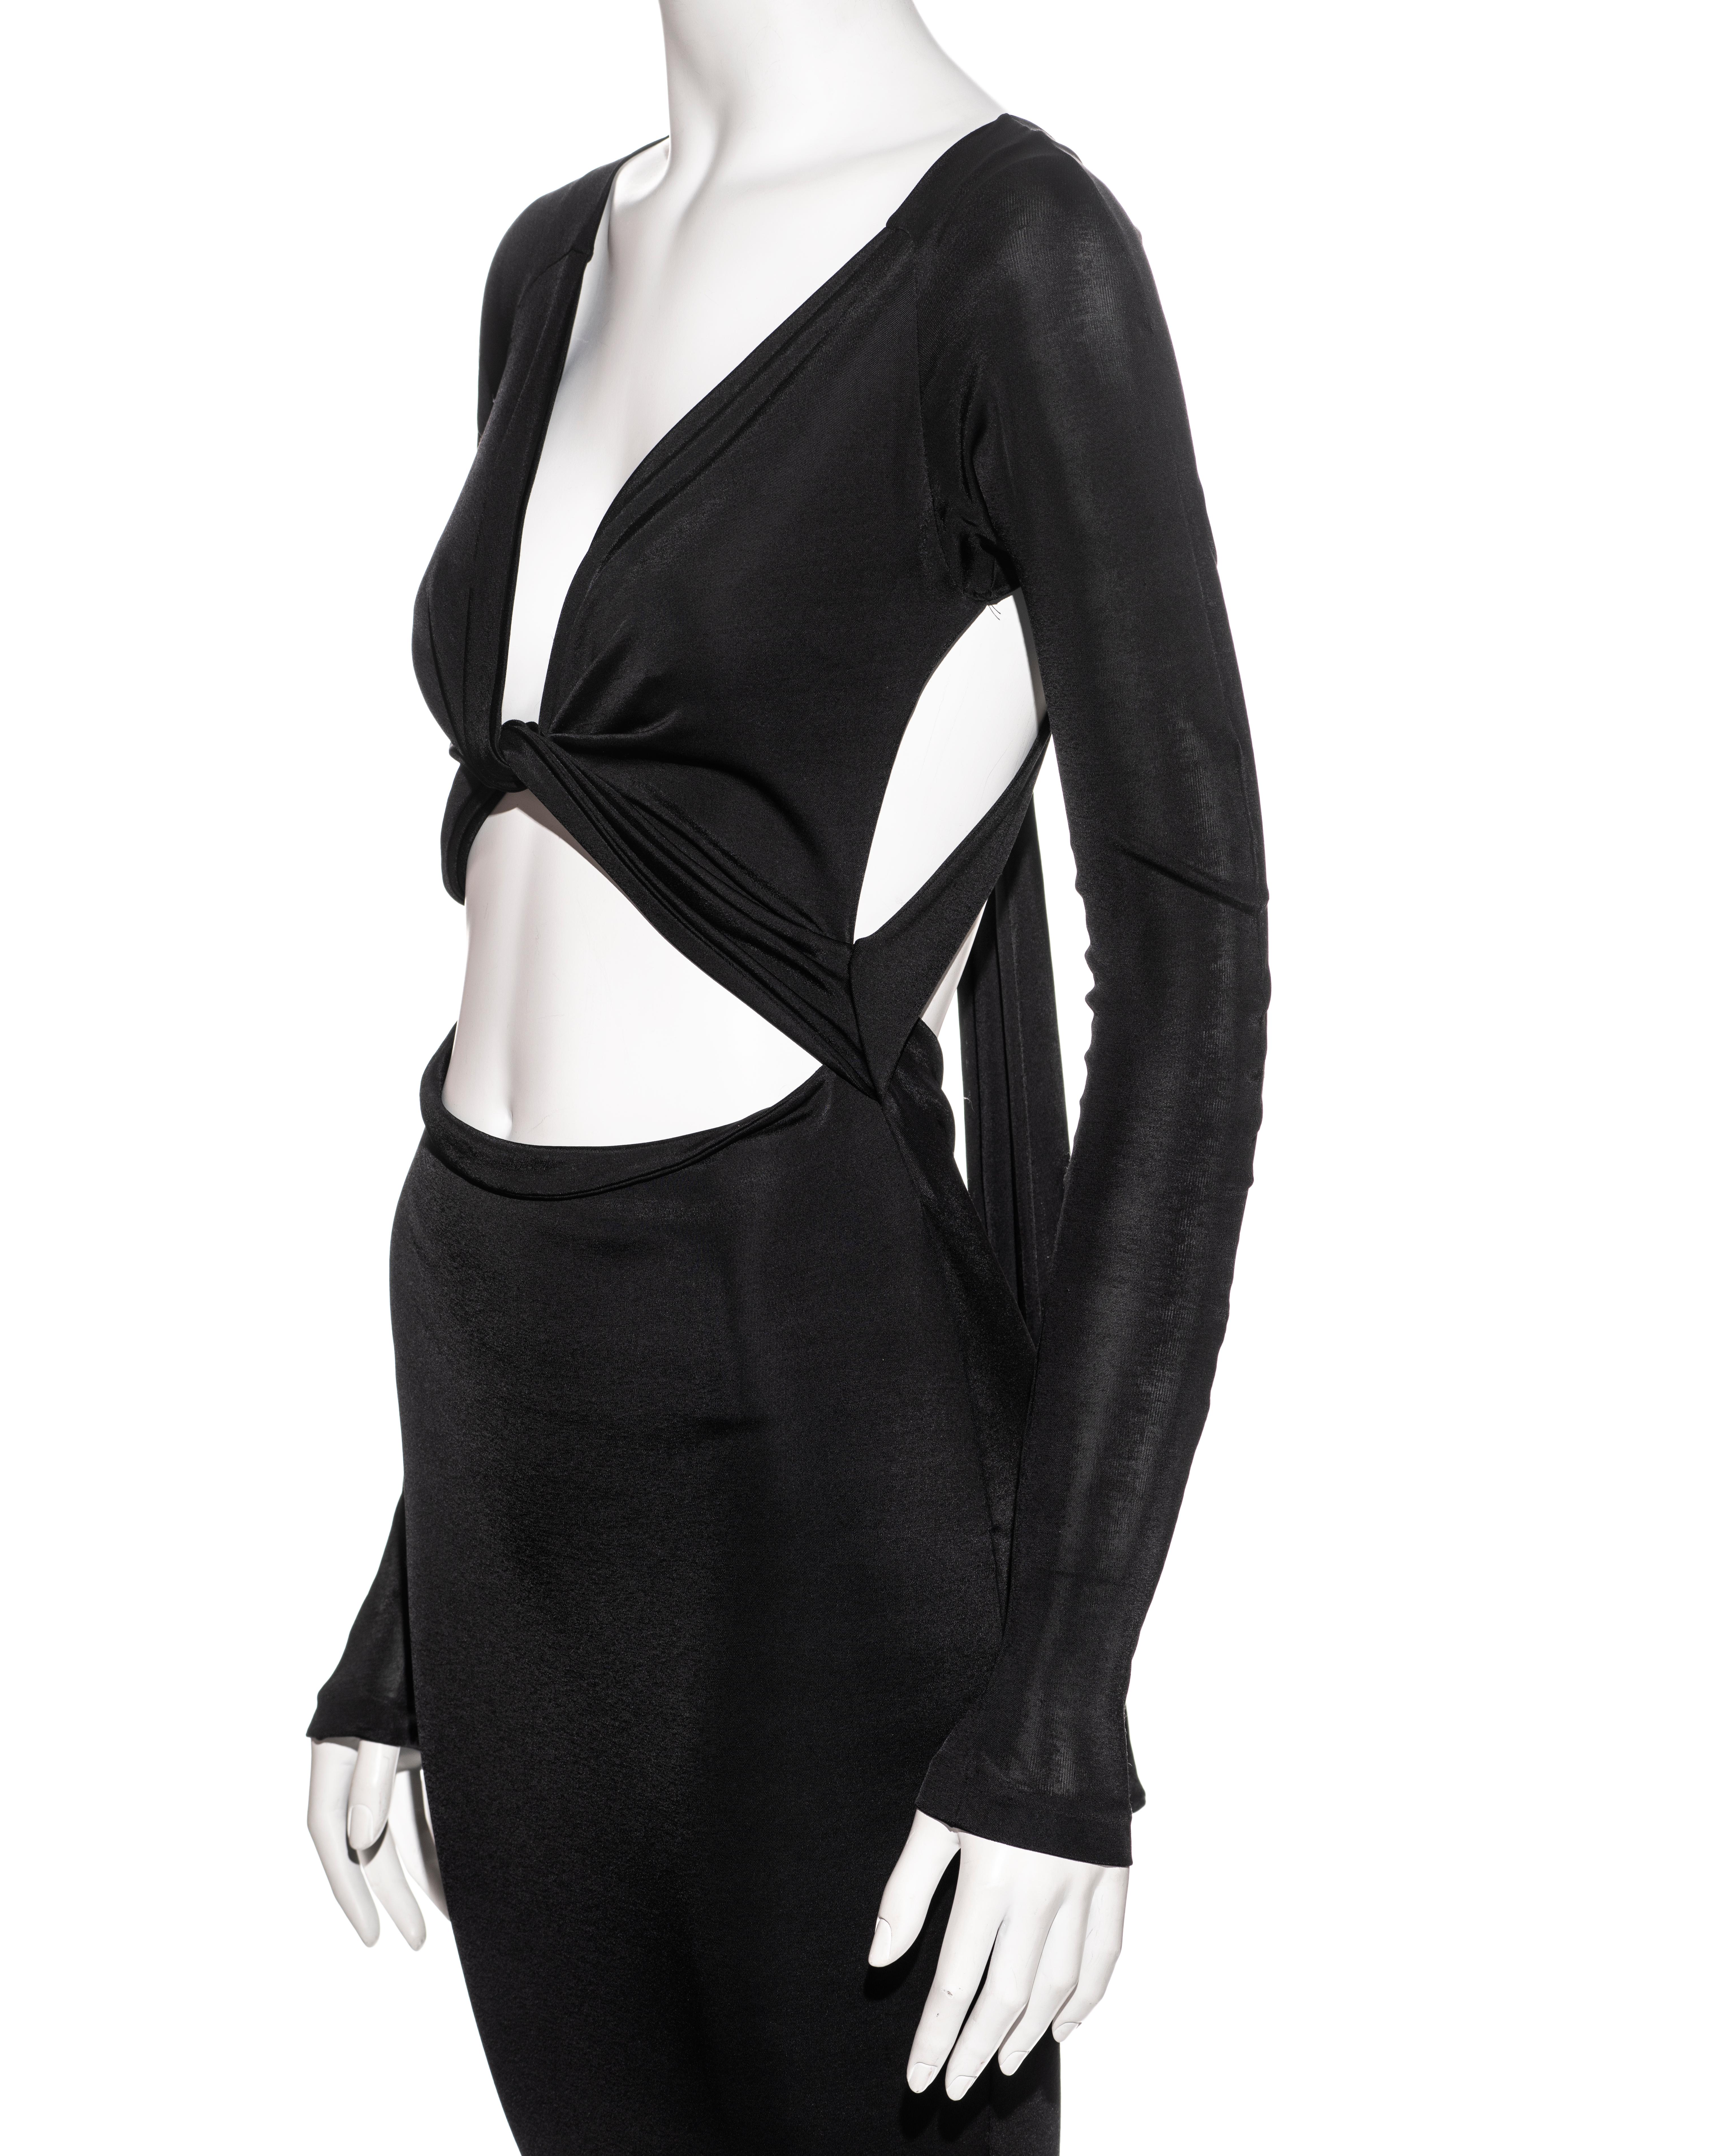 Gucci by Tom Ford black bare midriff long sleeve evening dress, fw 2003 2